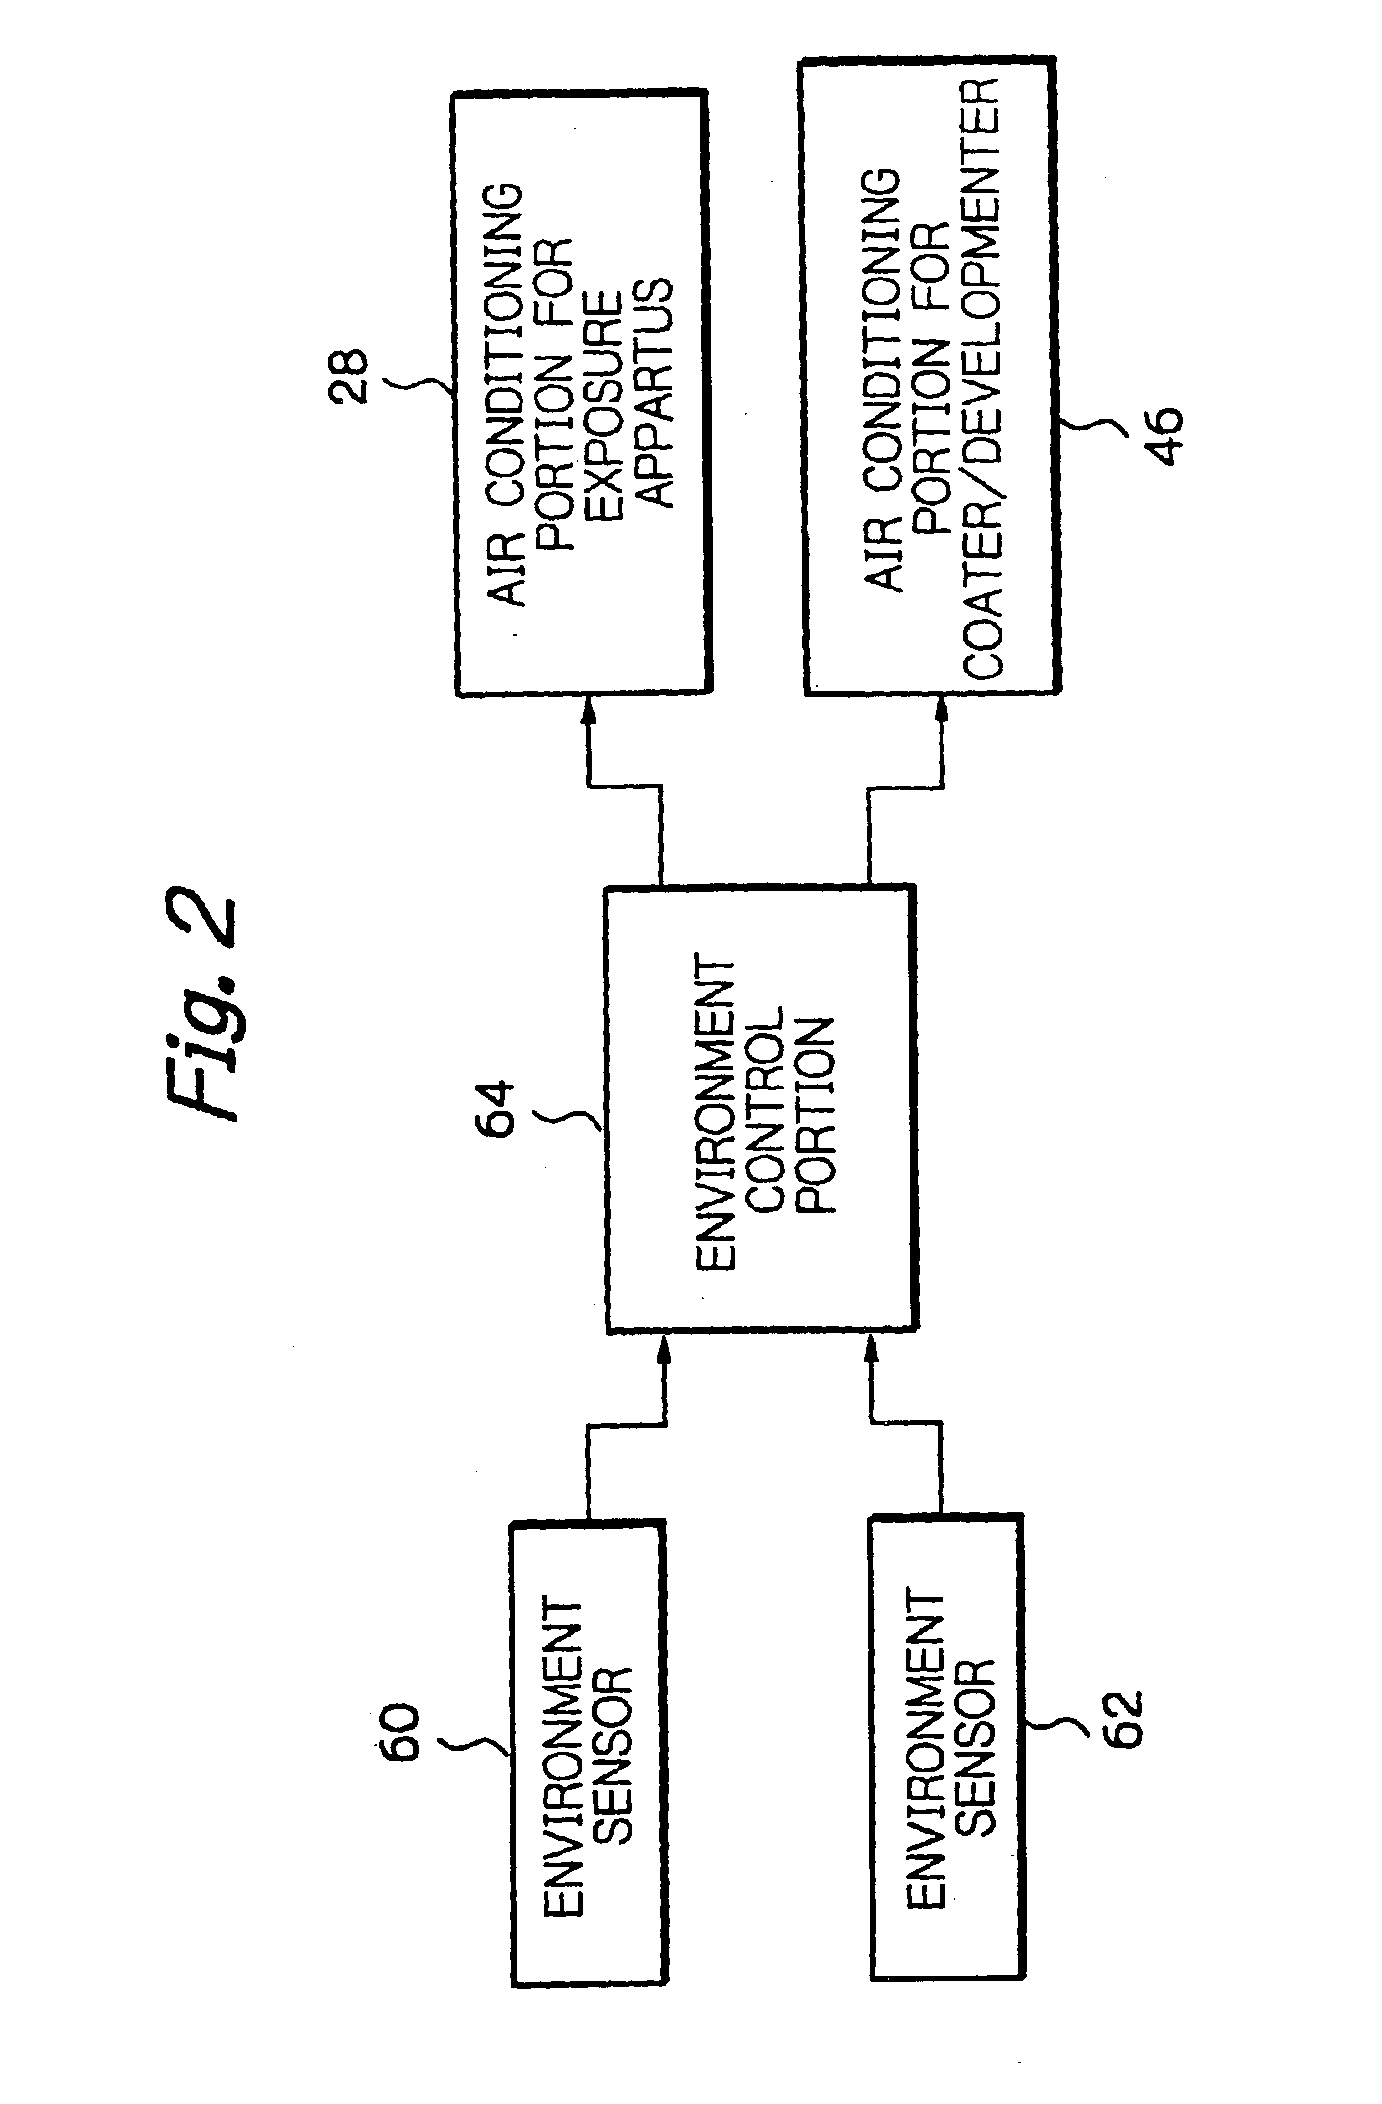 Lithography system and method